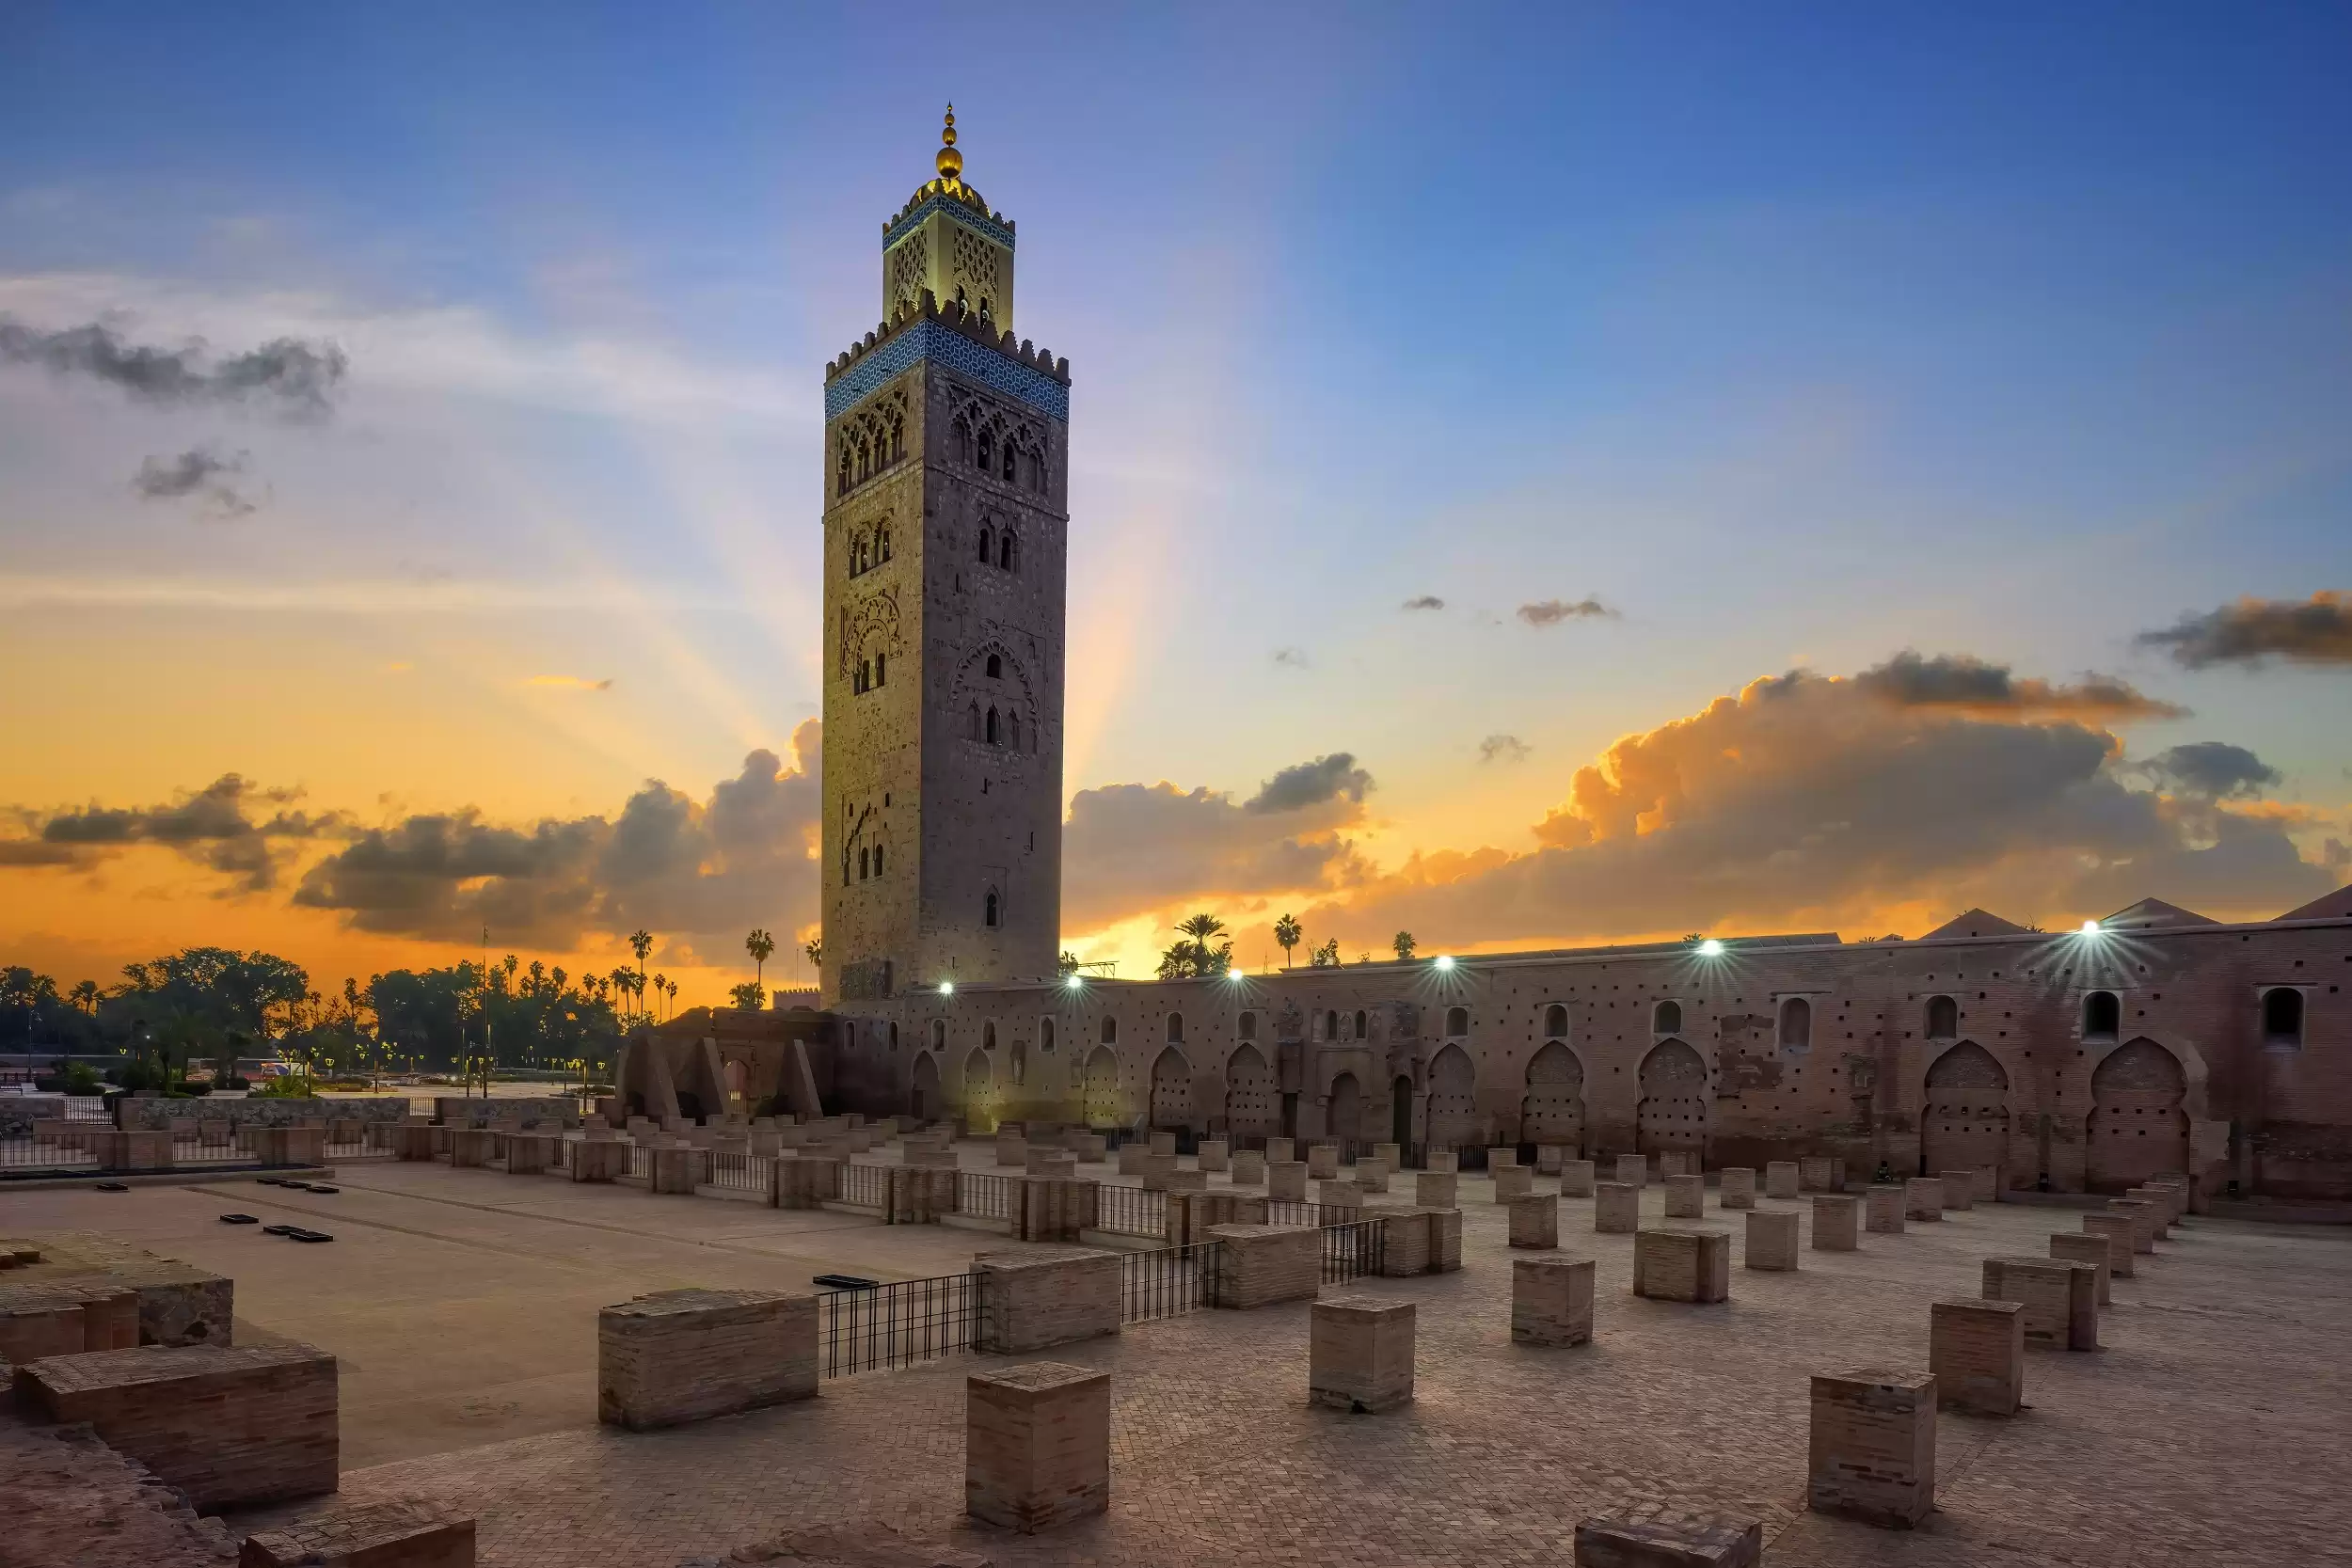 Marrakech's Architectural Marvels: A Testament to Its Historical Significance